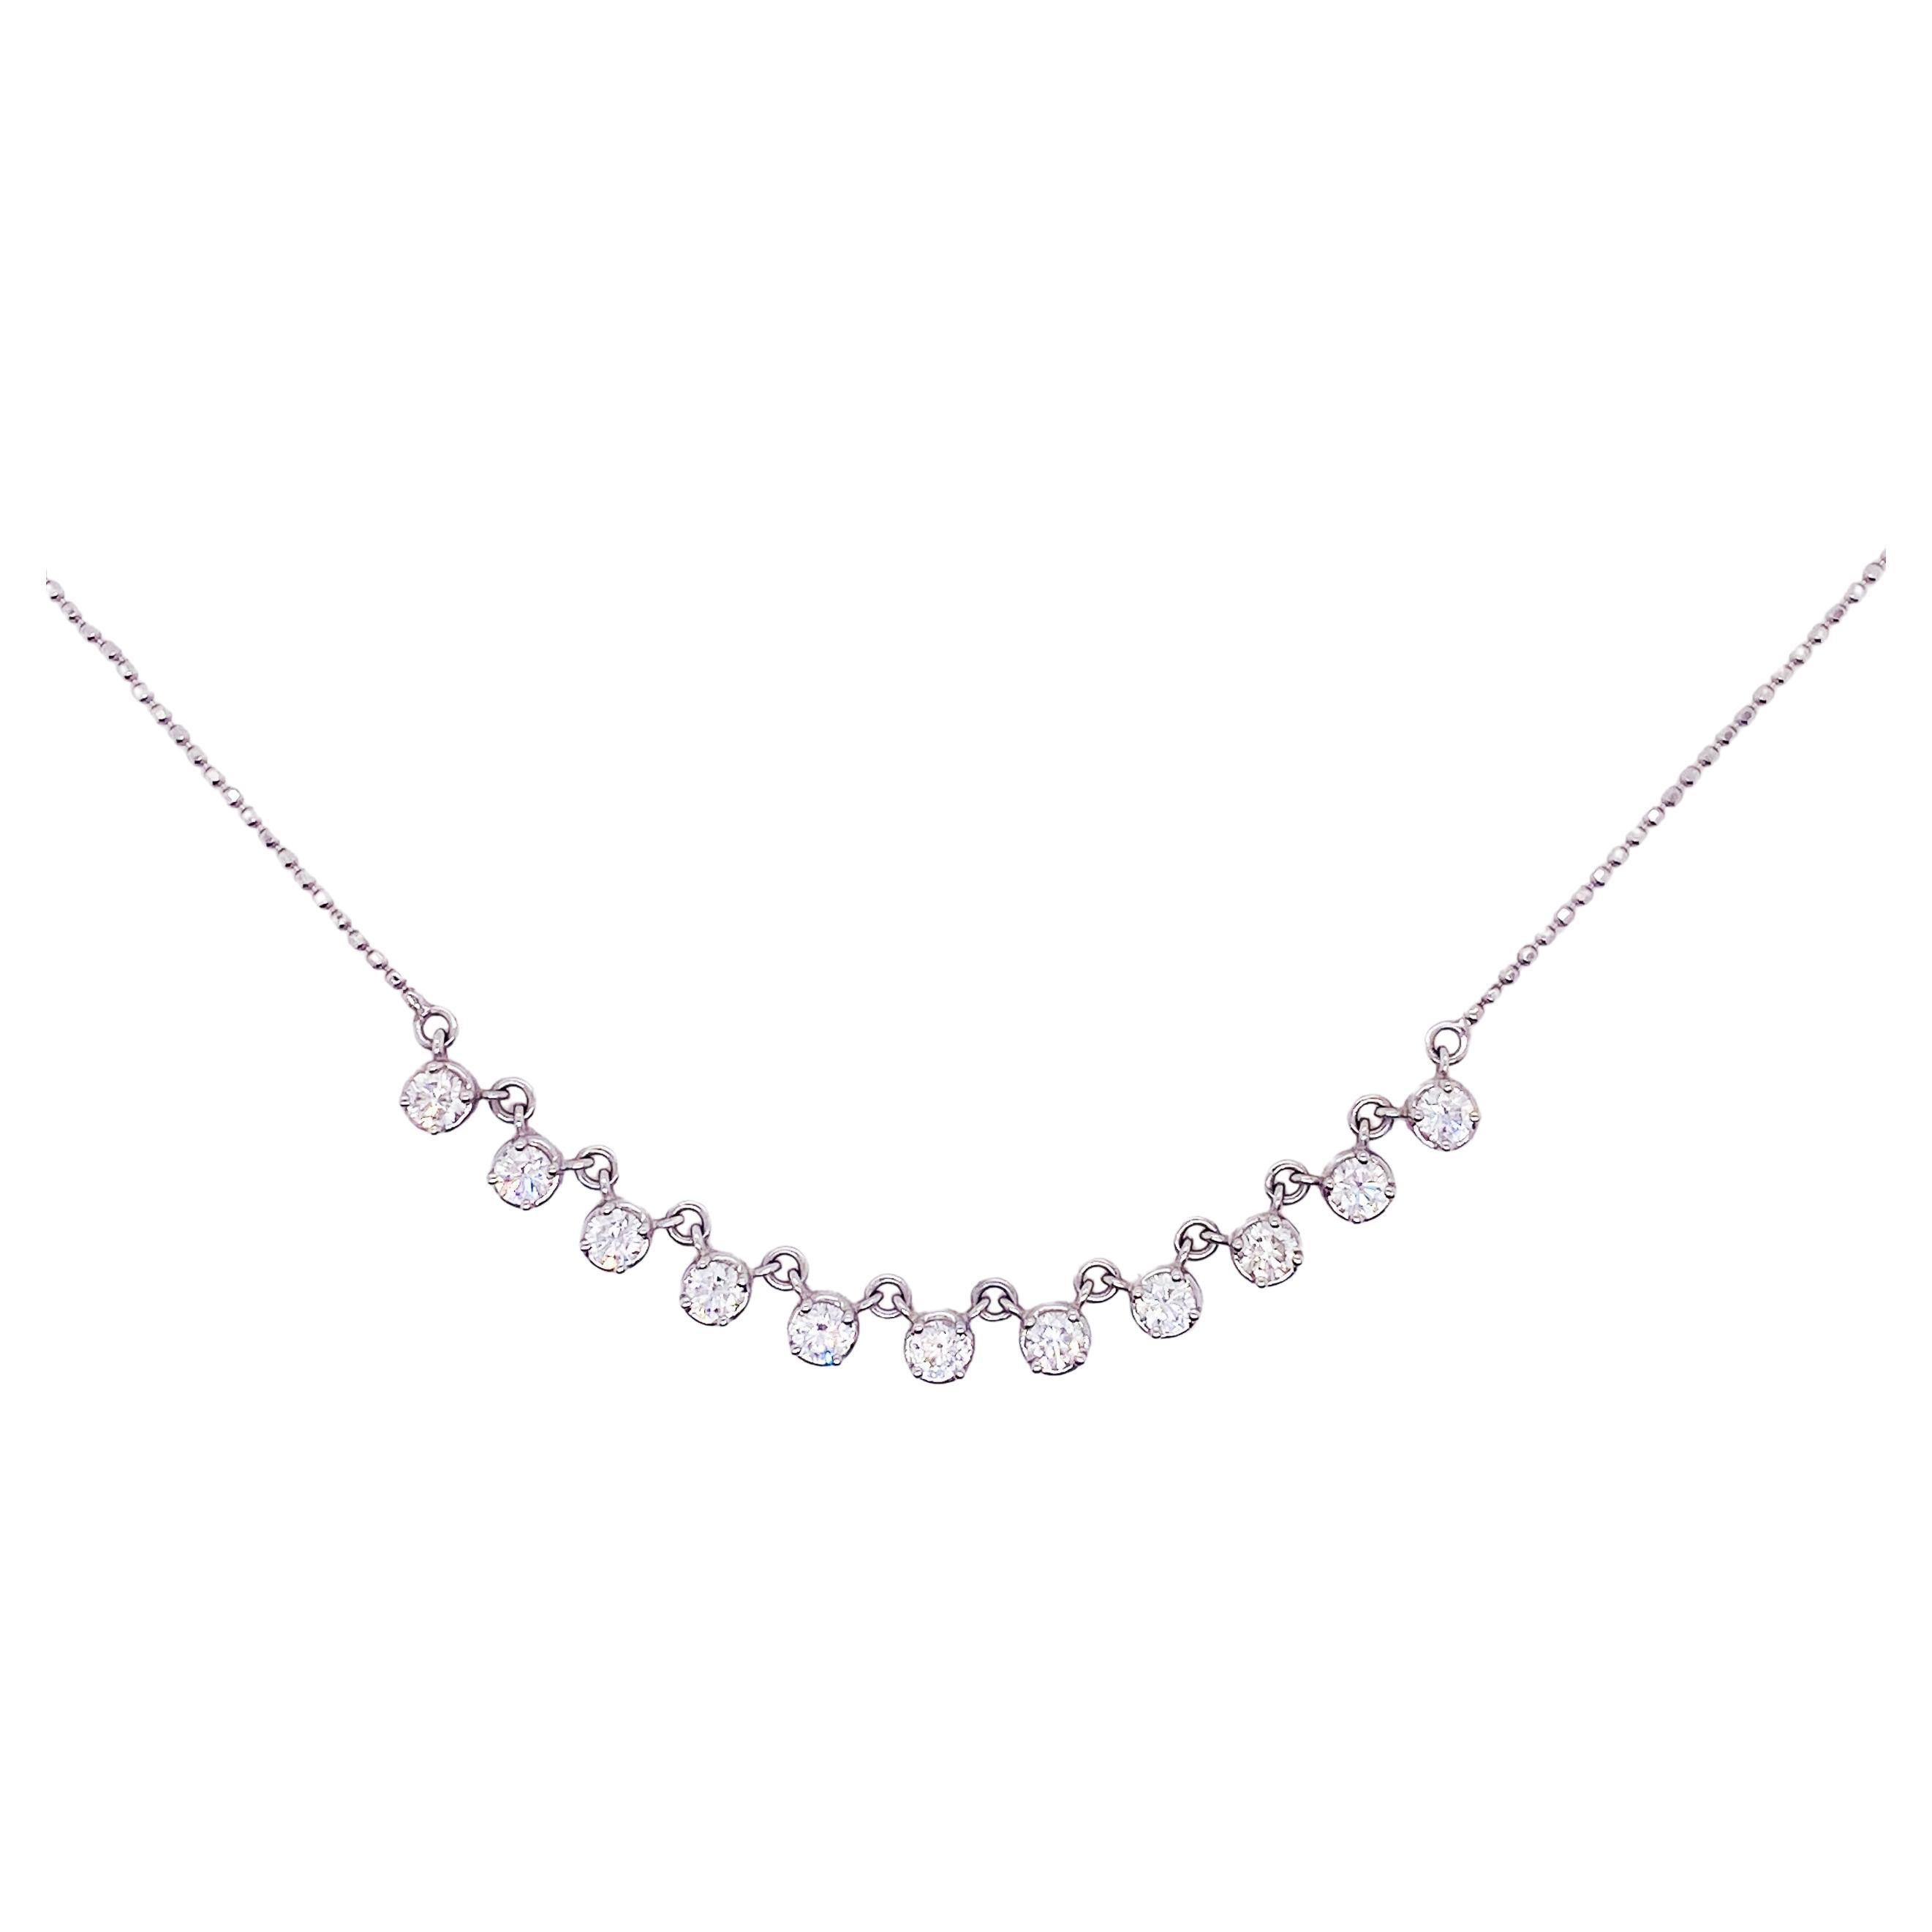 Fancy Link Diamond 0.88Carat Necklace 14K White Gold Beaded Chain Riviera Tennis For Sale